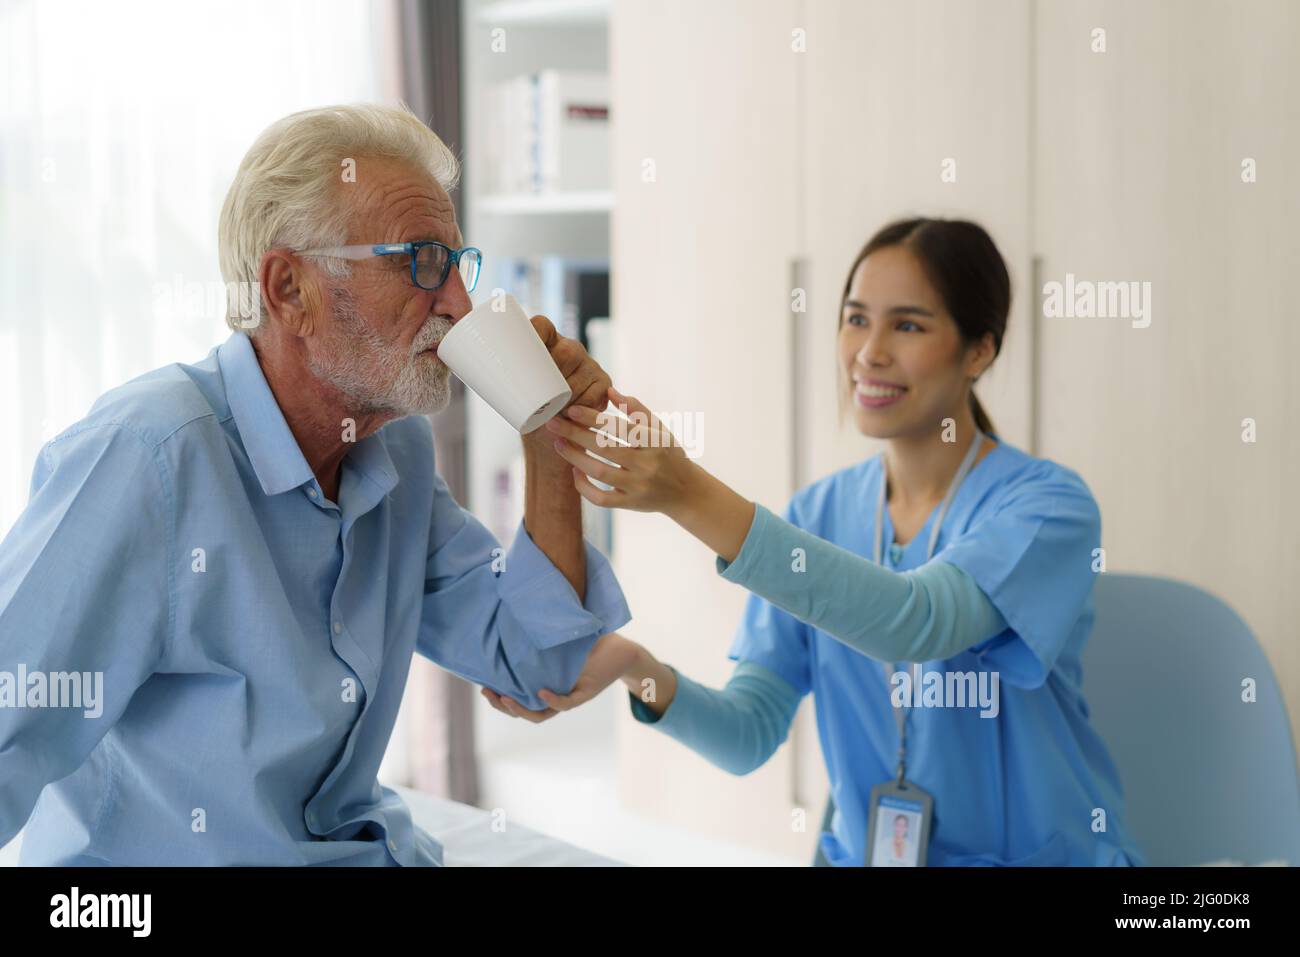 Asian elderly caregiver woman sitting on a hospital bed next to an older man helping drink a glass of water from the bedroom at home. Stock Photo